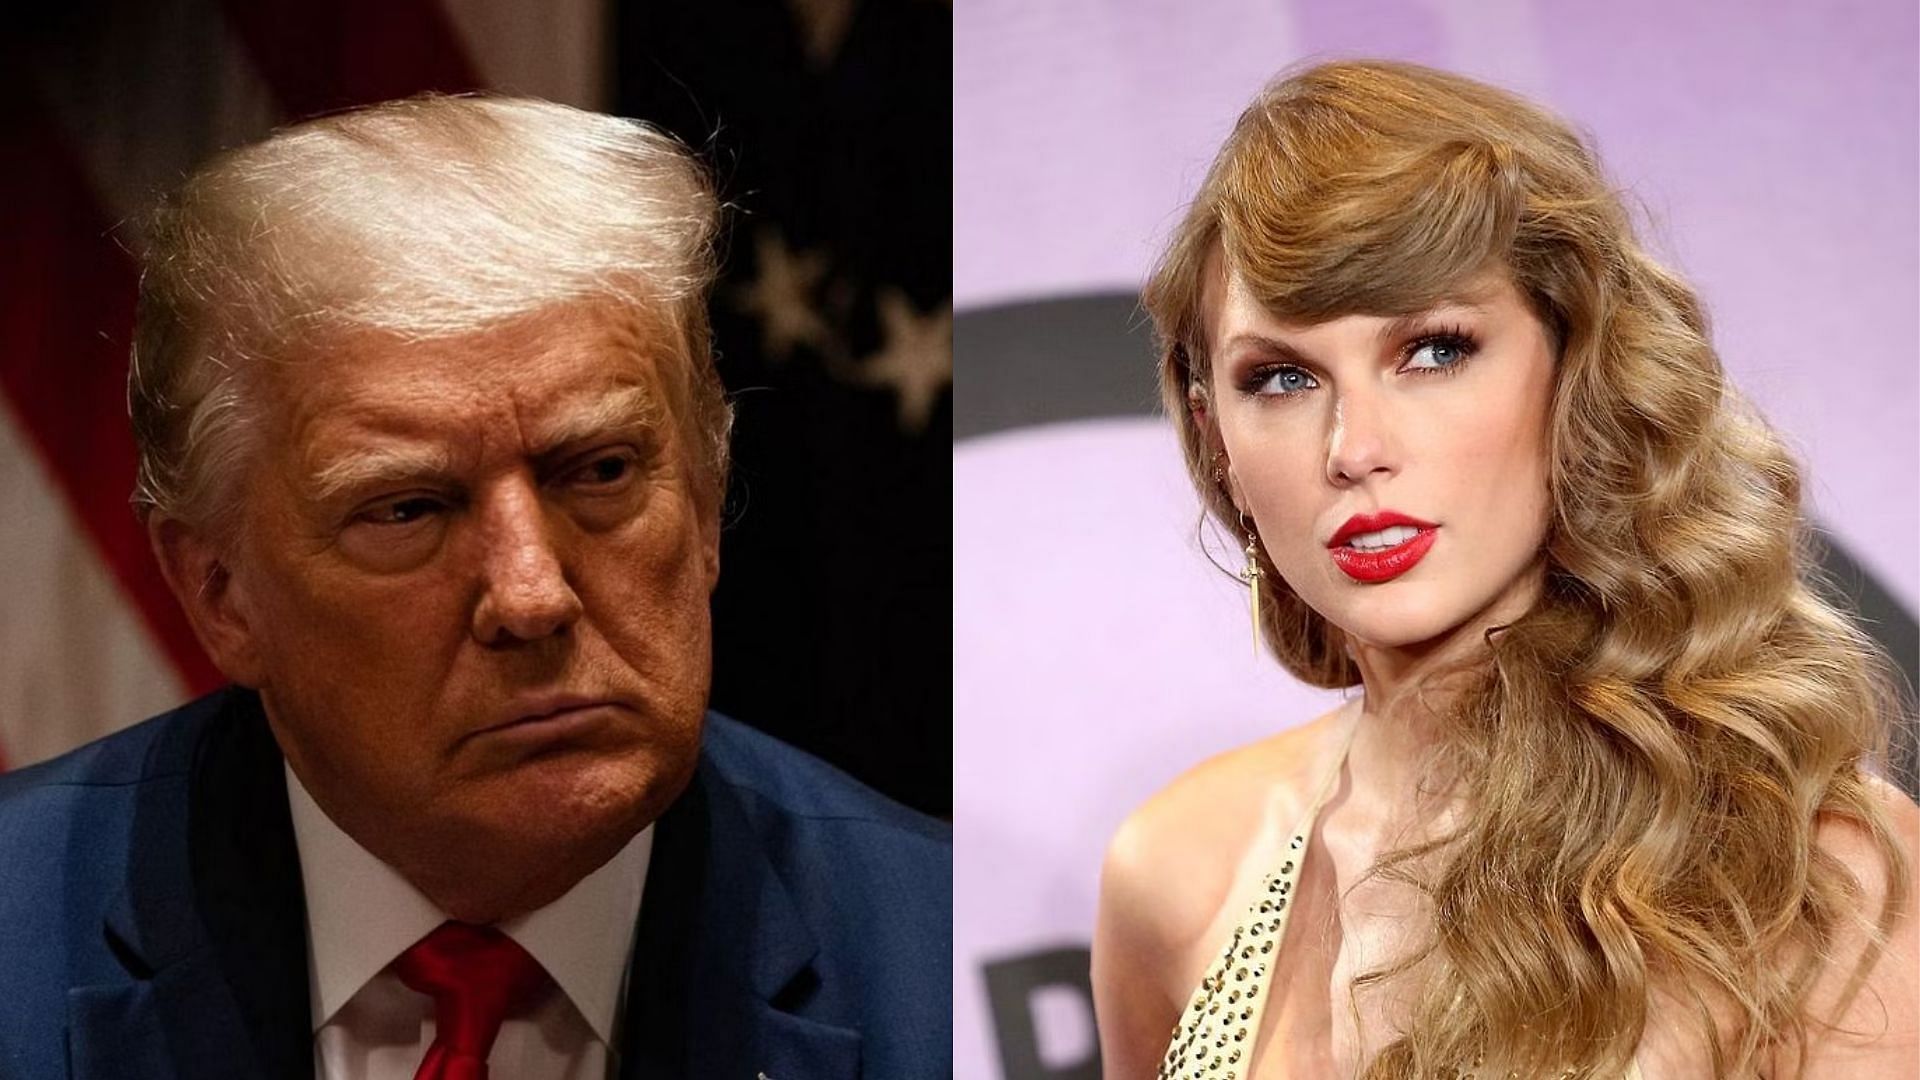 Taylor Swift is the only one who can defeat Donald Trump in the 2024 election